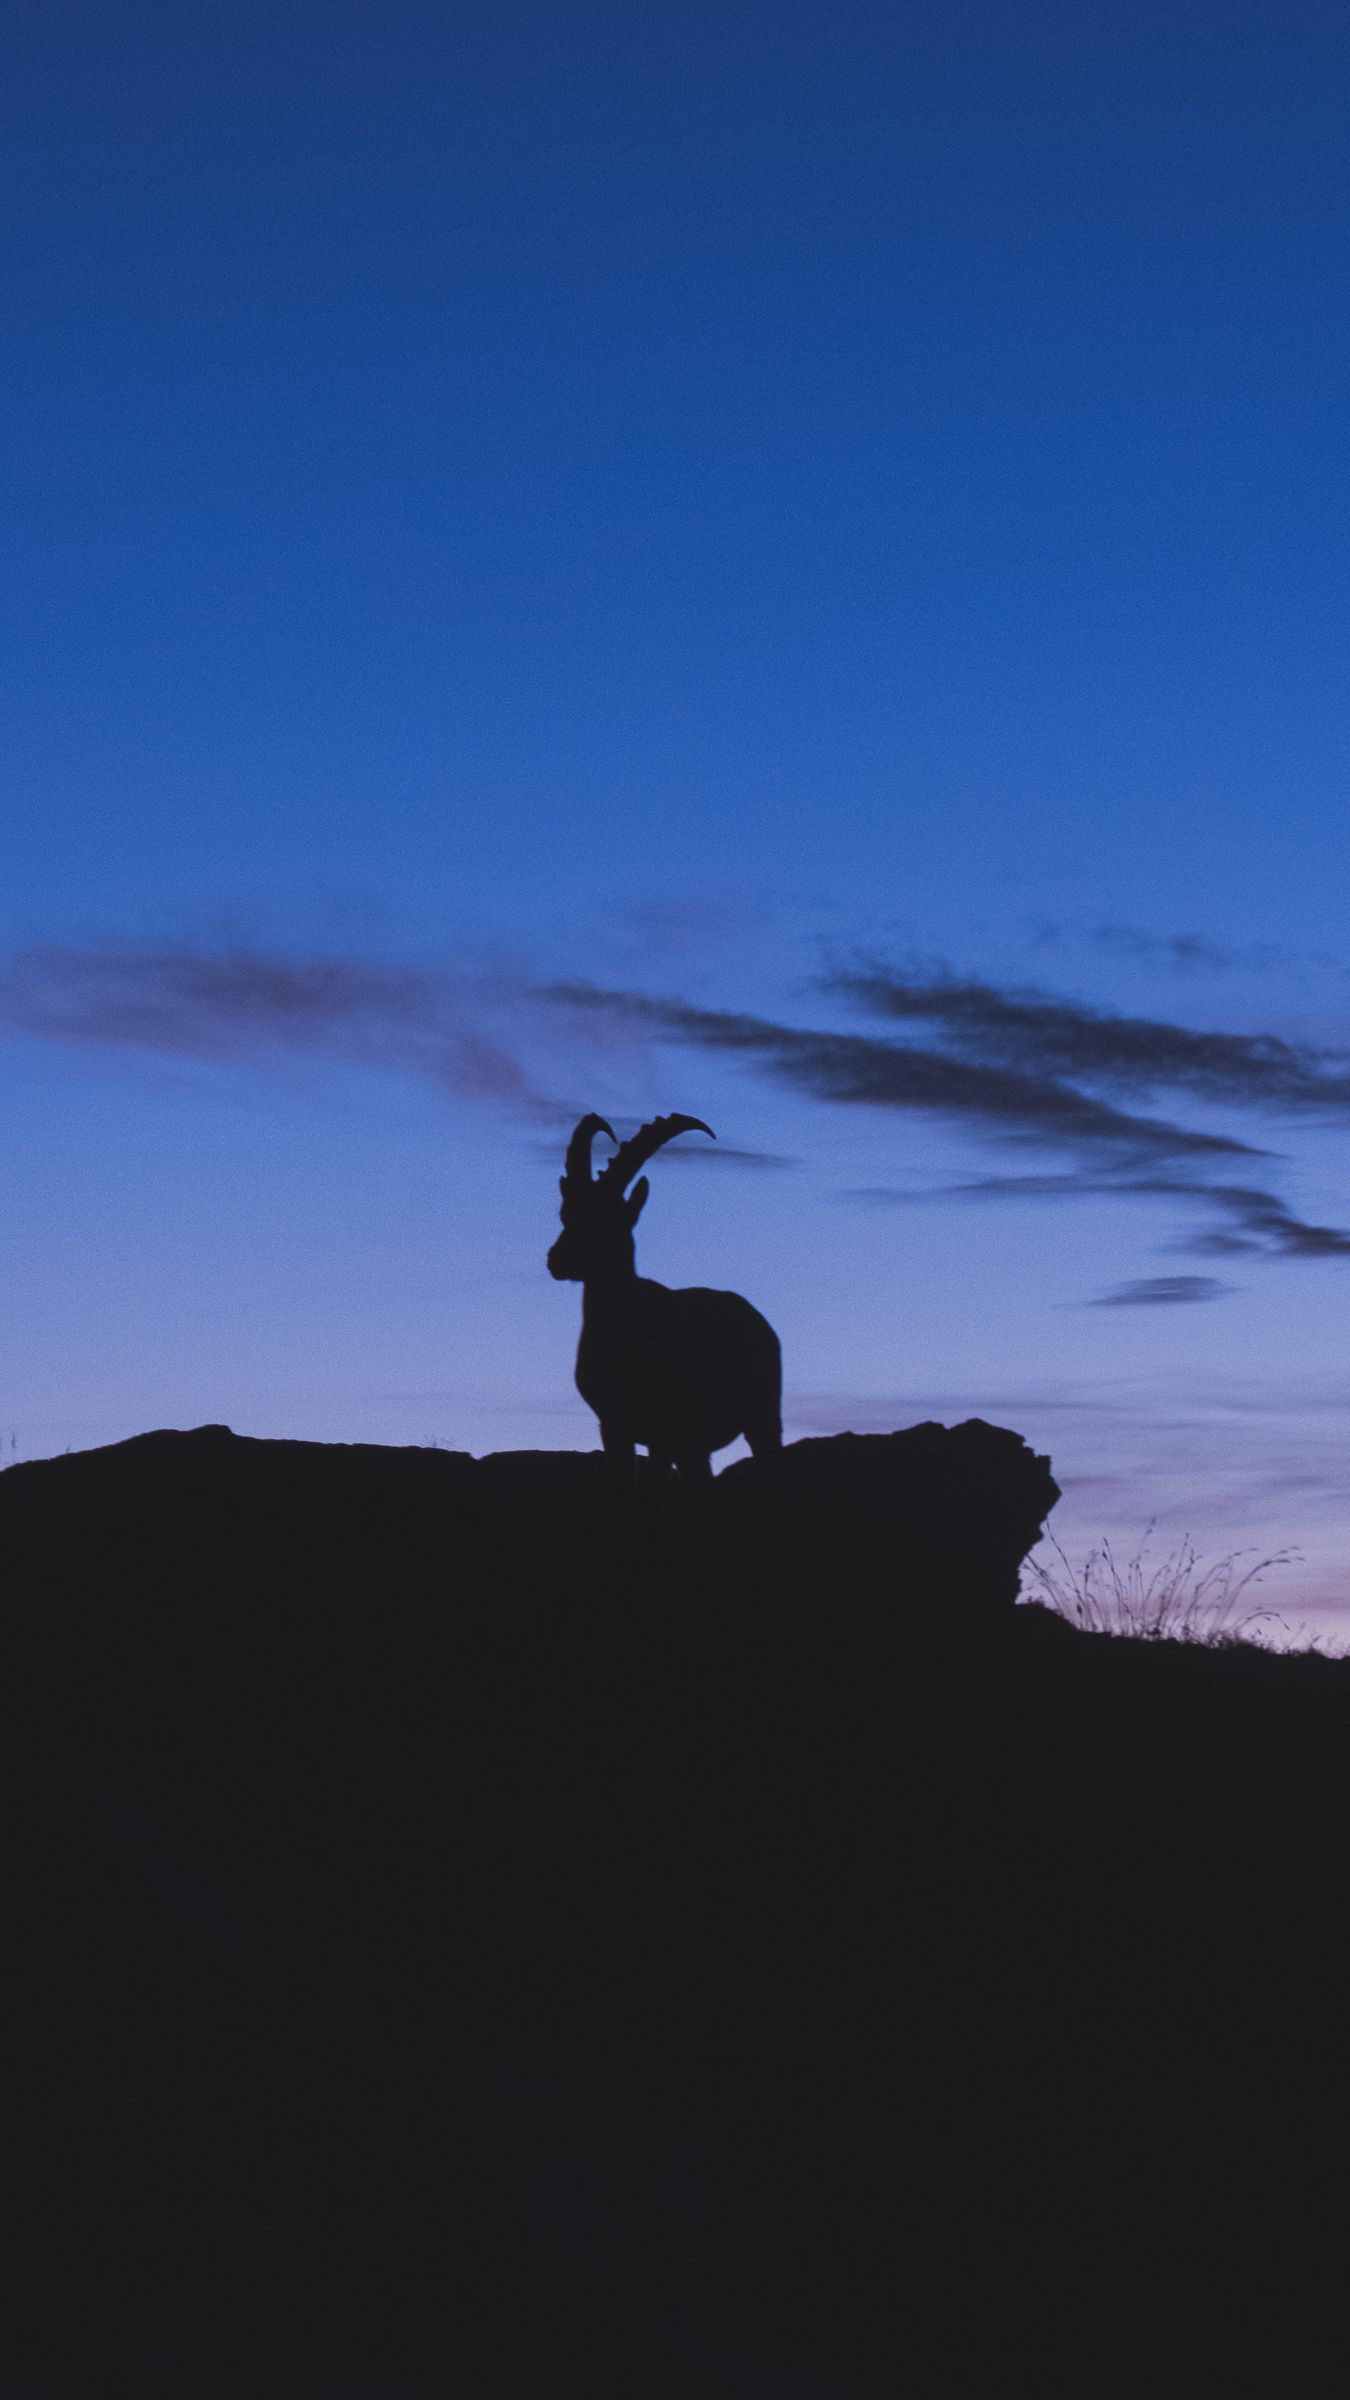 Download wallpaper 1350x2400 mountain goat, silhouette, night iphone  8+/7+/6s+/6+ for parallax hd background